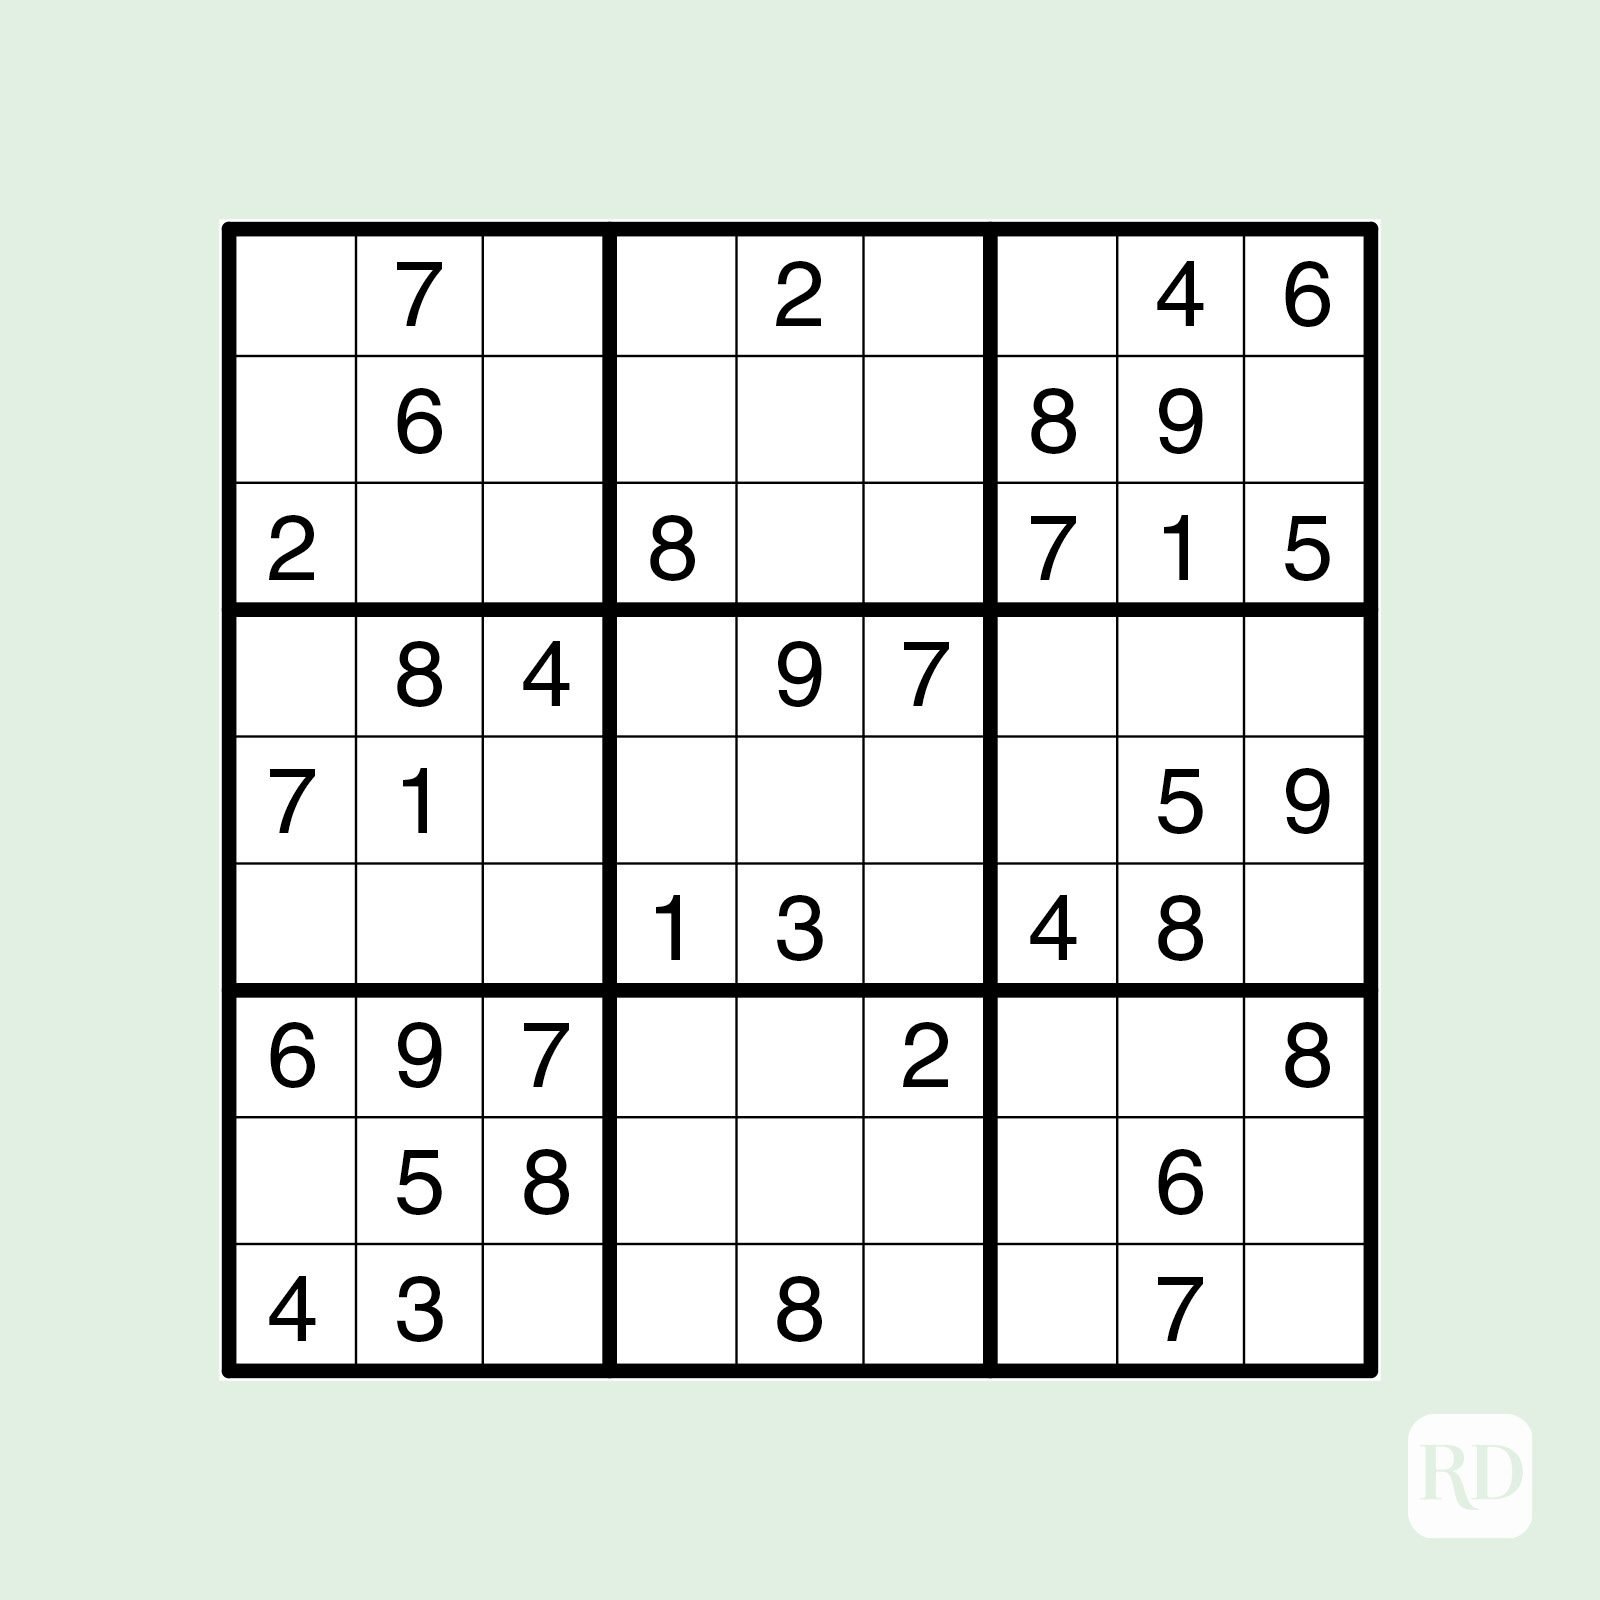 20 Free Printable Sudoku Puzzles for All Levels Reader #39 s Digest